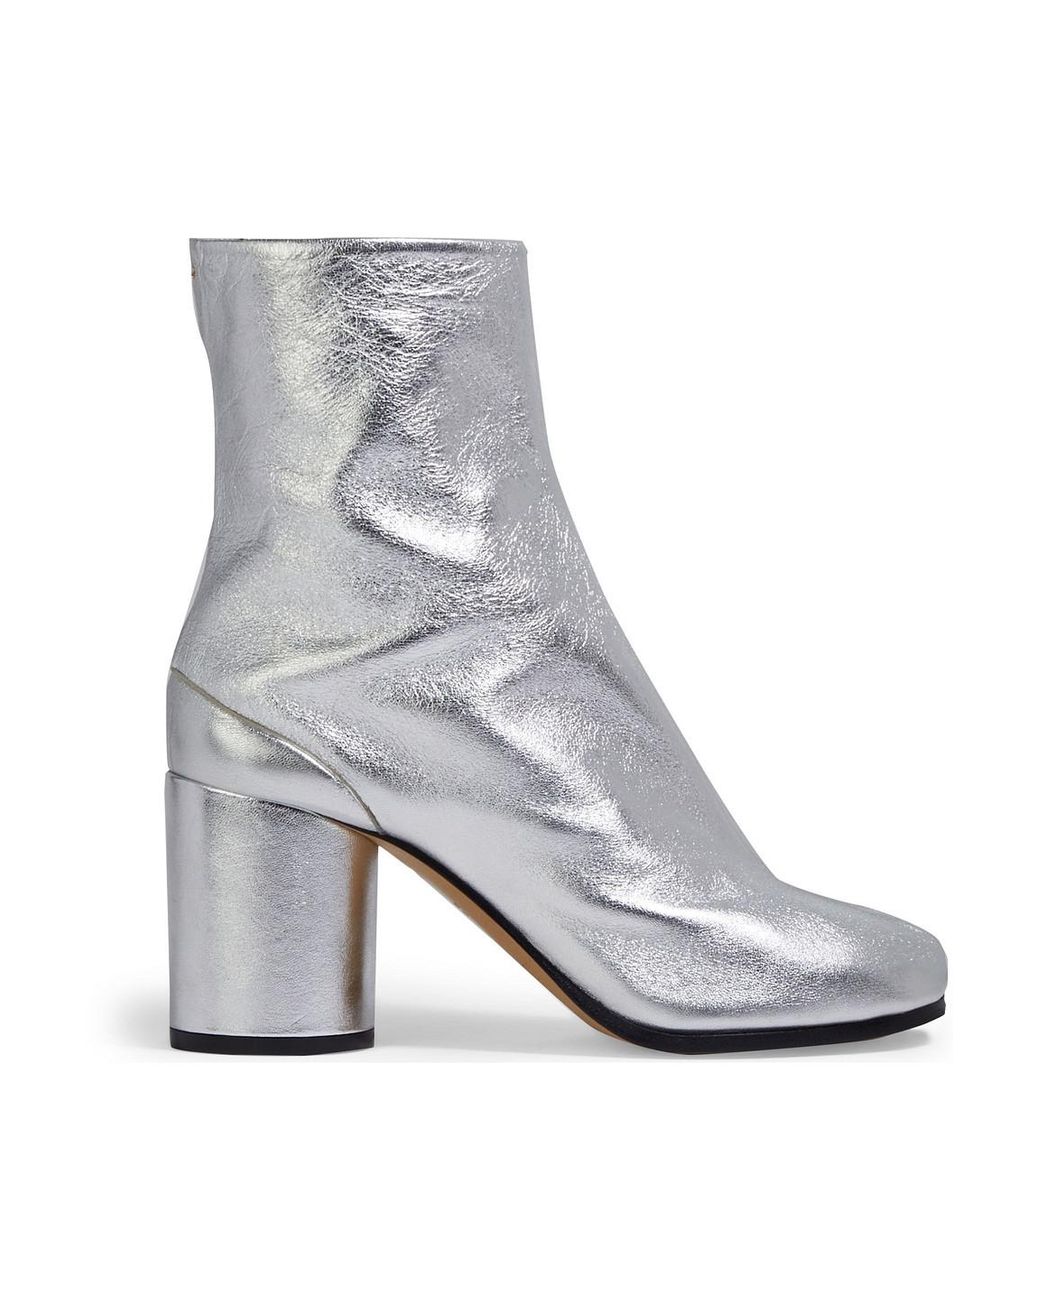 Maison Margiela Tabi Cracked-leather Ankle Boots in White | Lyst